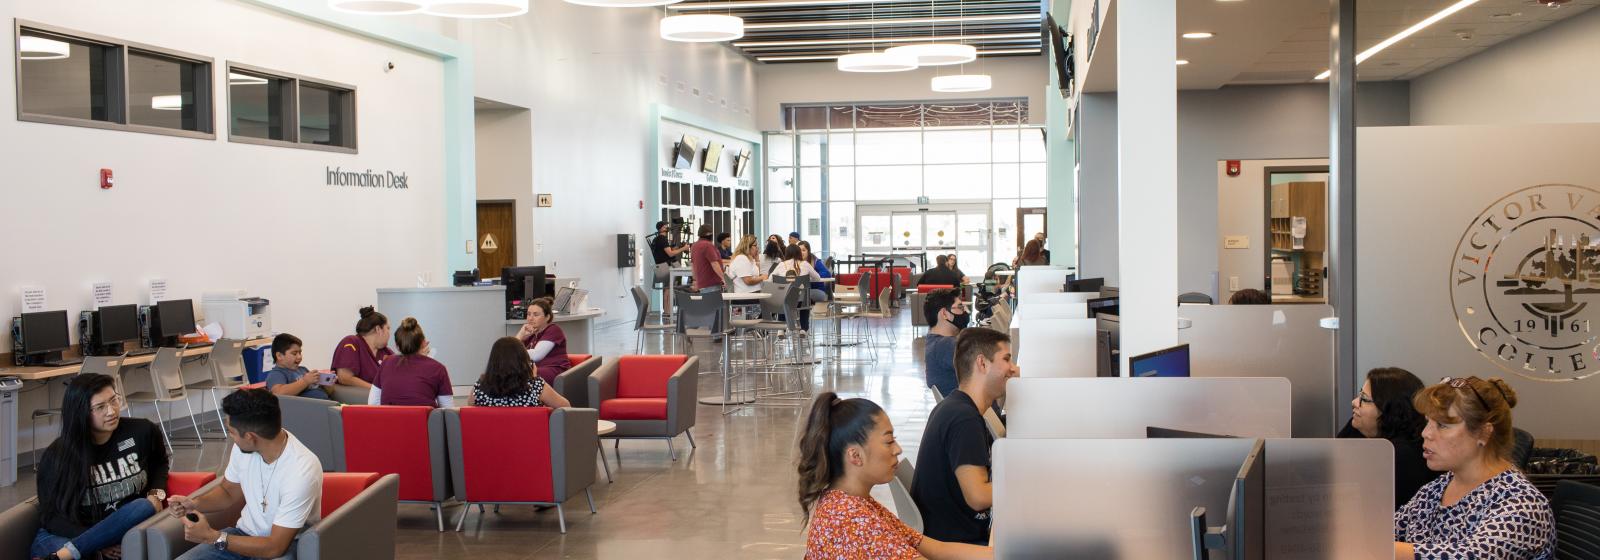 Students and staff in the Student Services building